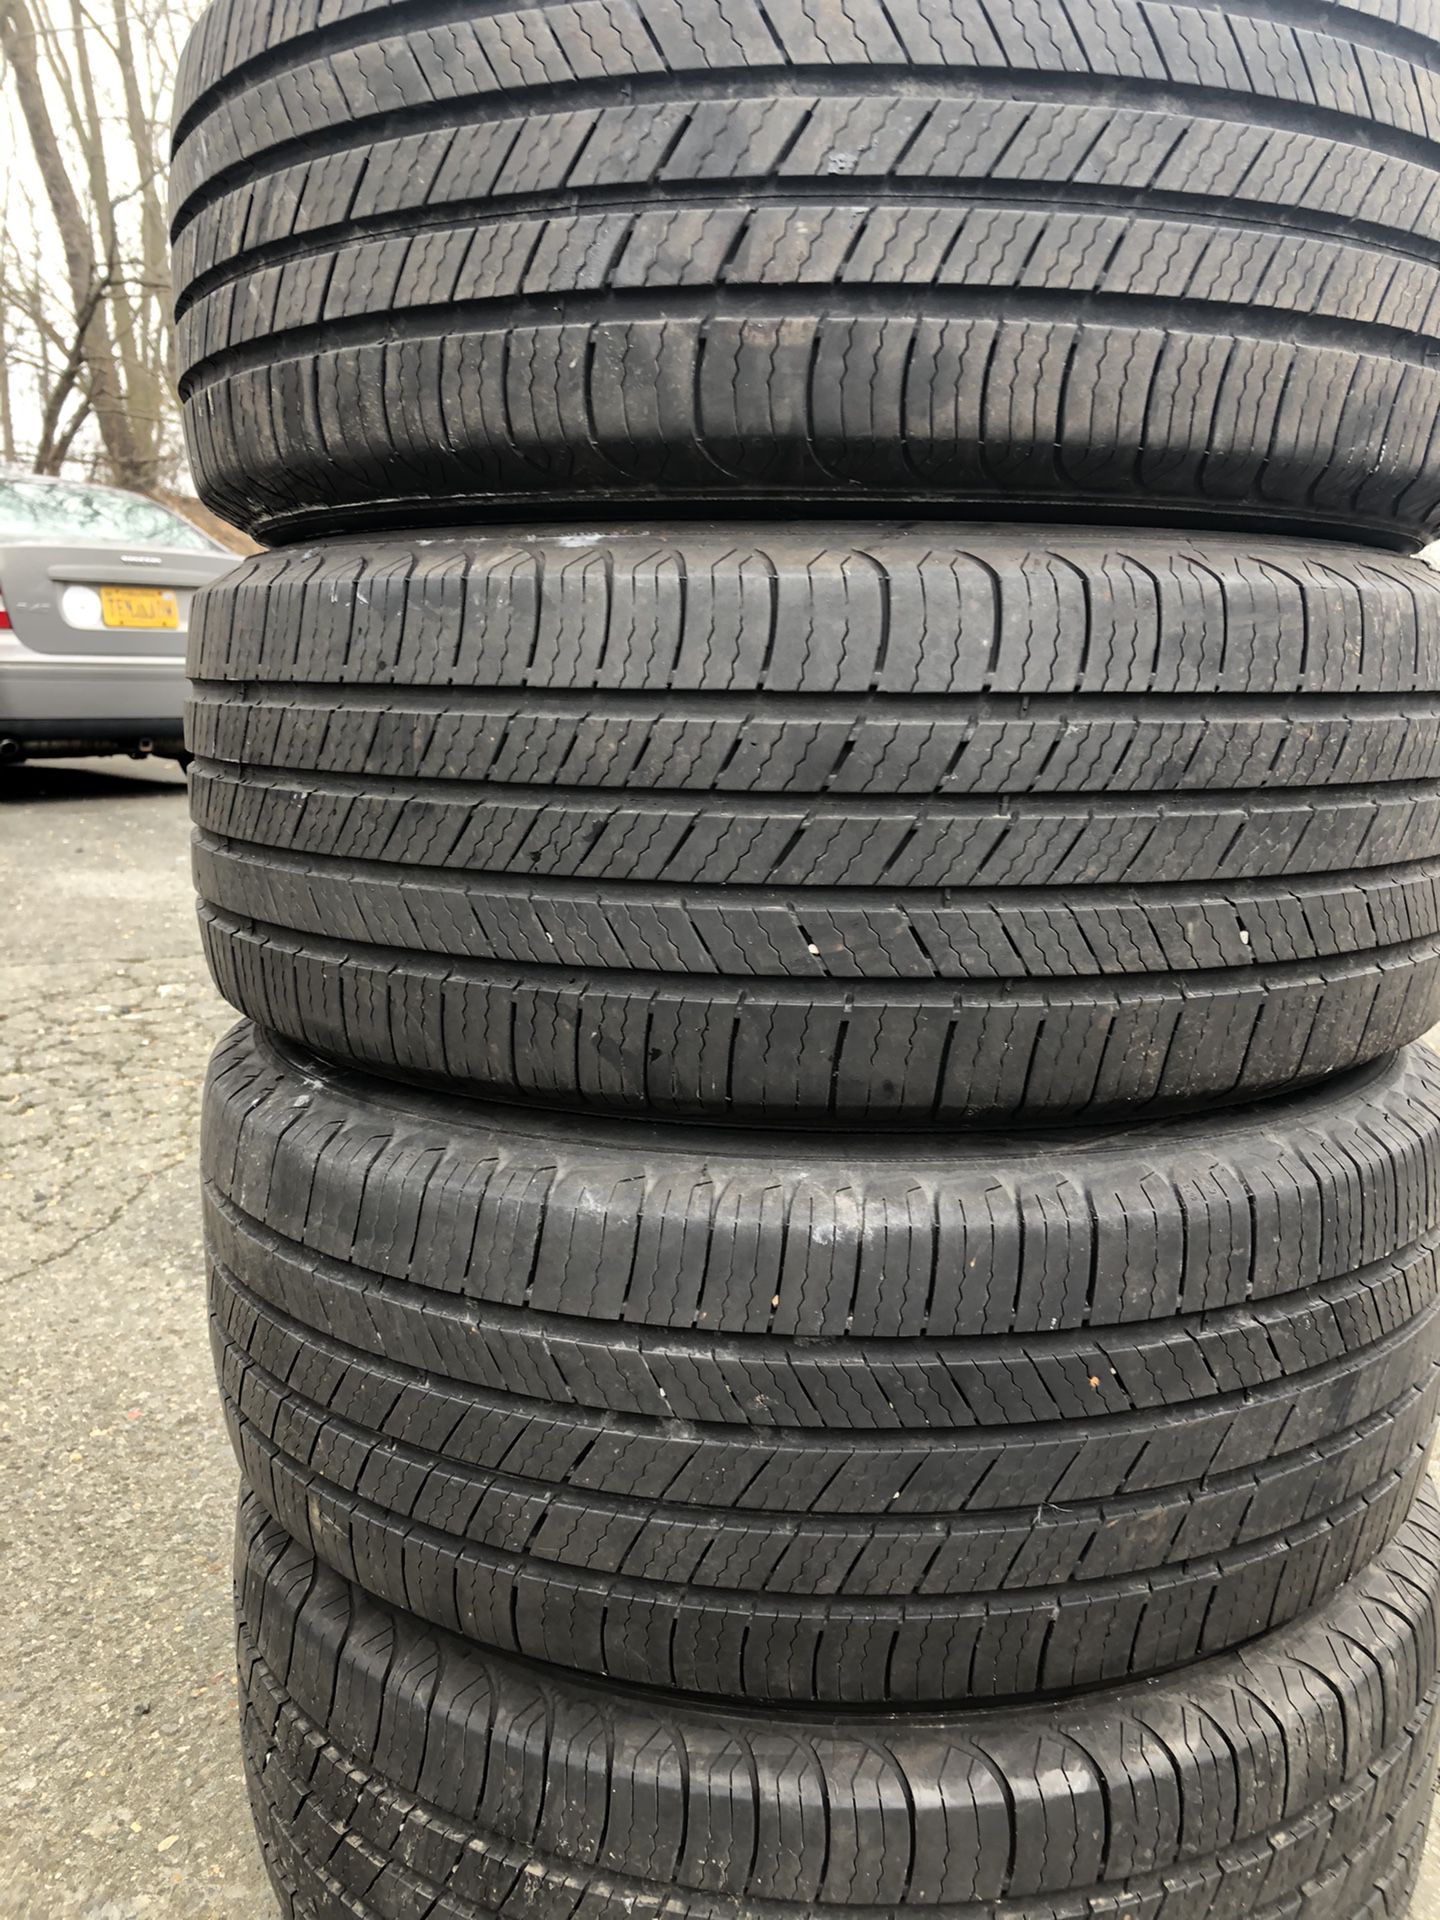 Set 4 usted tire 205/55R16 MICHELIN set 4 used tire $130